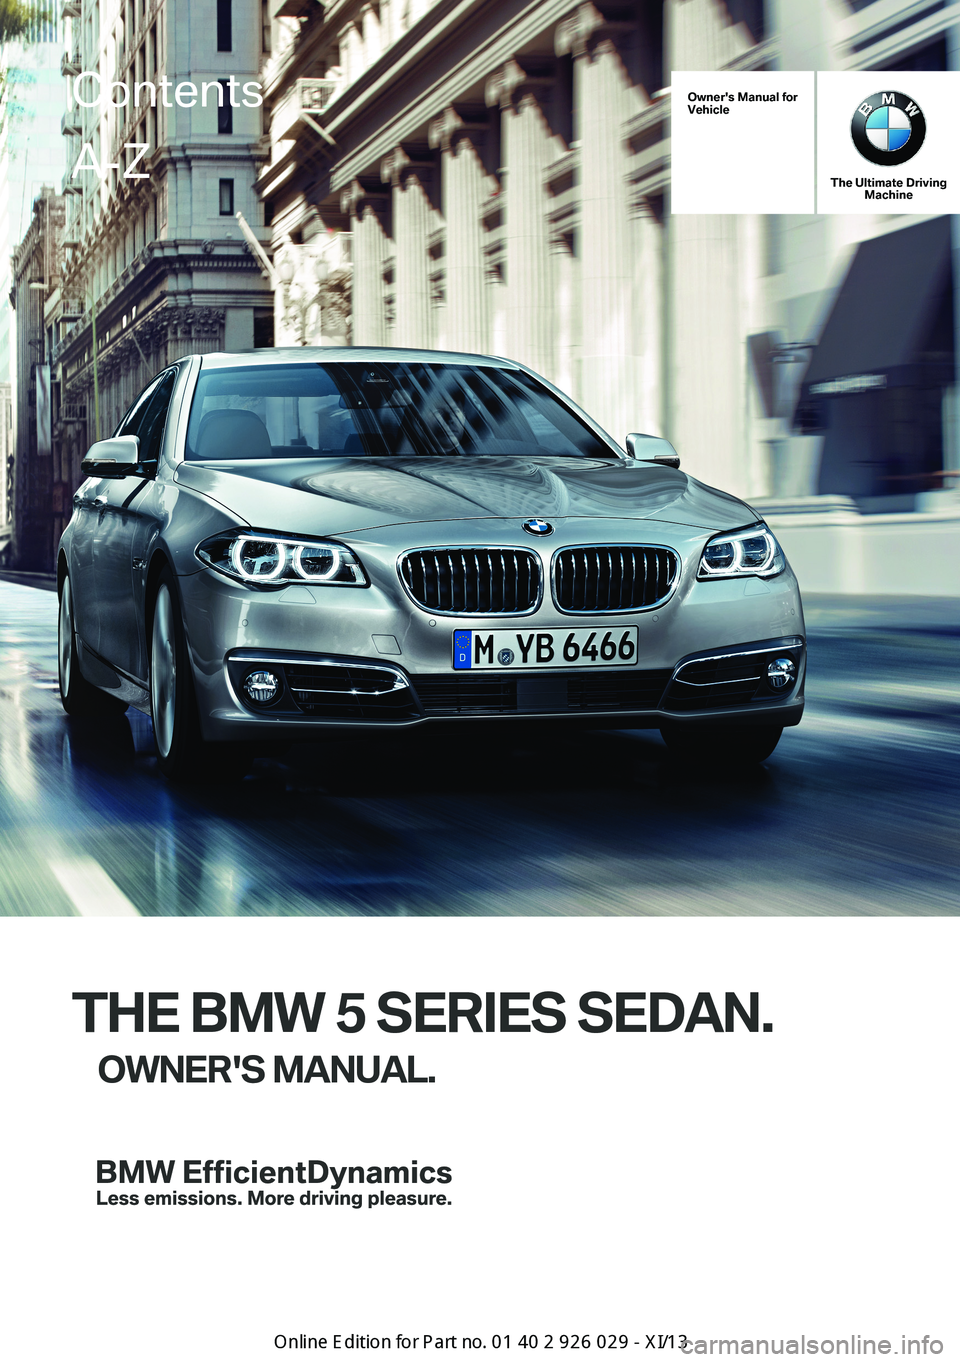 BMW 535I XDRIVE SEDAN 2013  Owners Manual Owner's Manual forVehicle
The Ultimate DrivingMachine
THE BMW 5 SERIES SEDAN.
OWNER'S MANUAL.ContentsA-Z
Online Edition for Part no. 01 40 2 911 177 - VI/13   